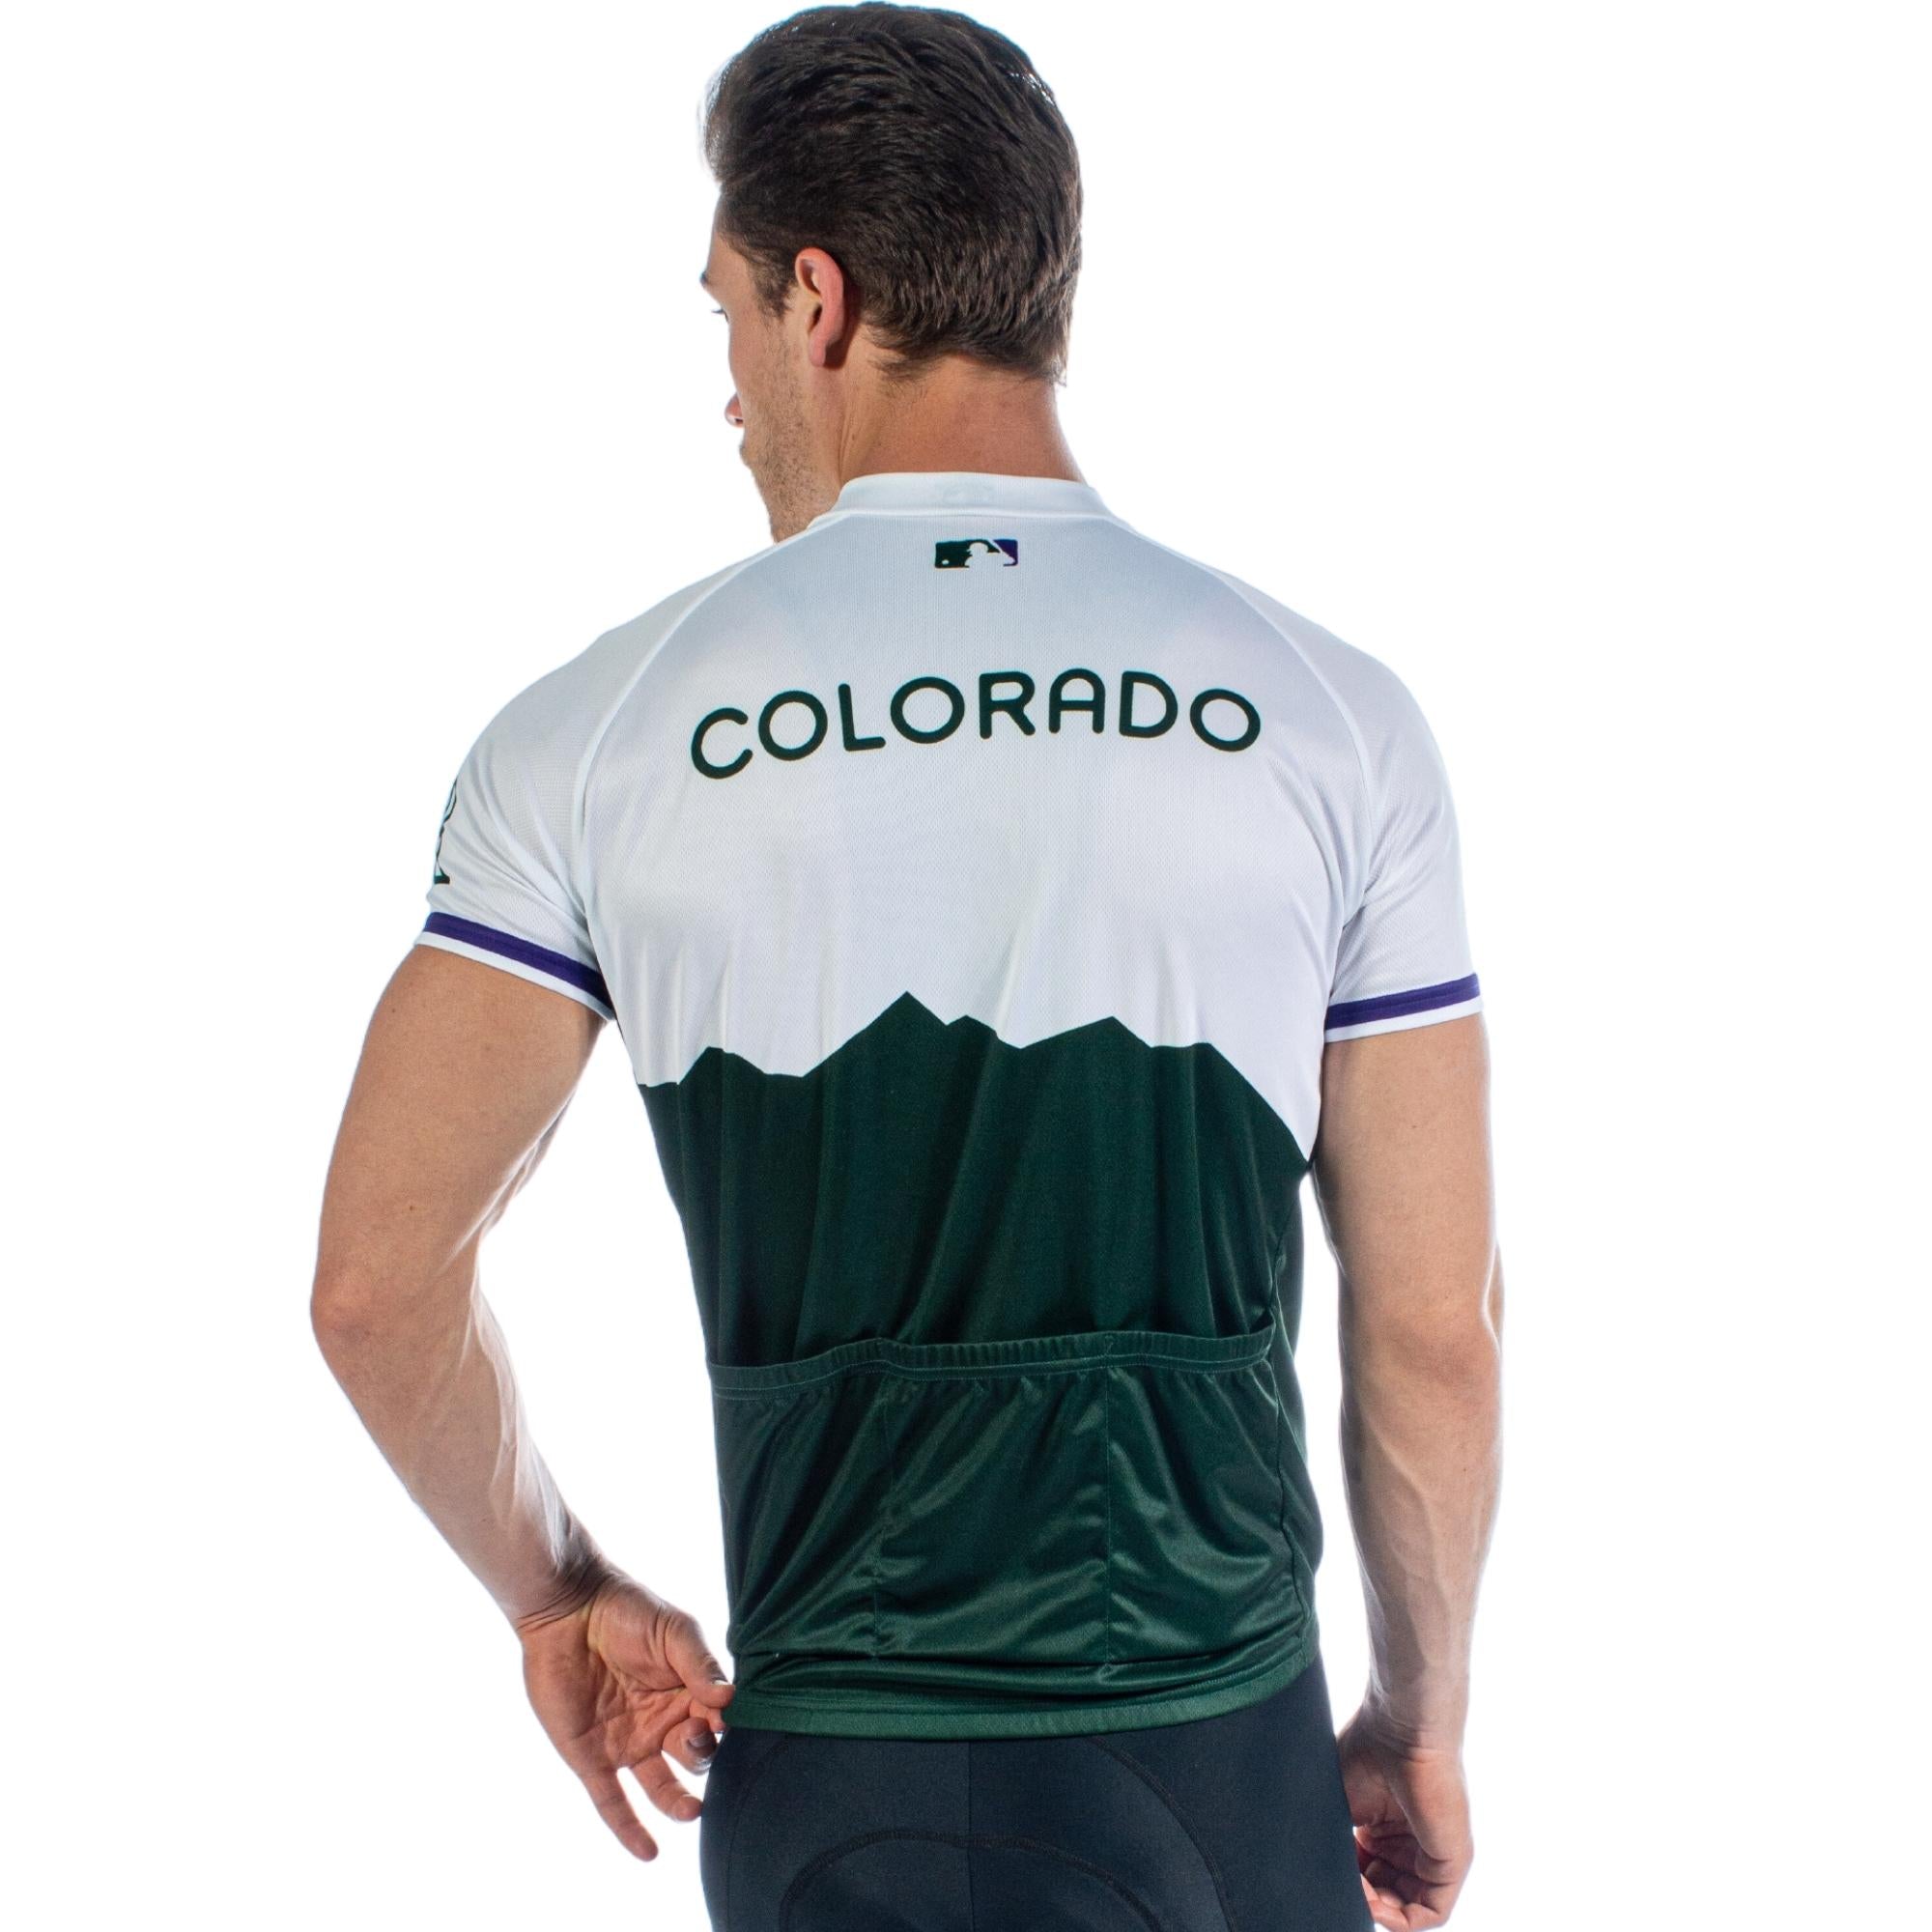 Rockies' City Connect jersey divides internet: 'license plate